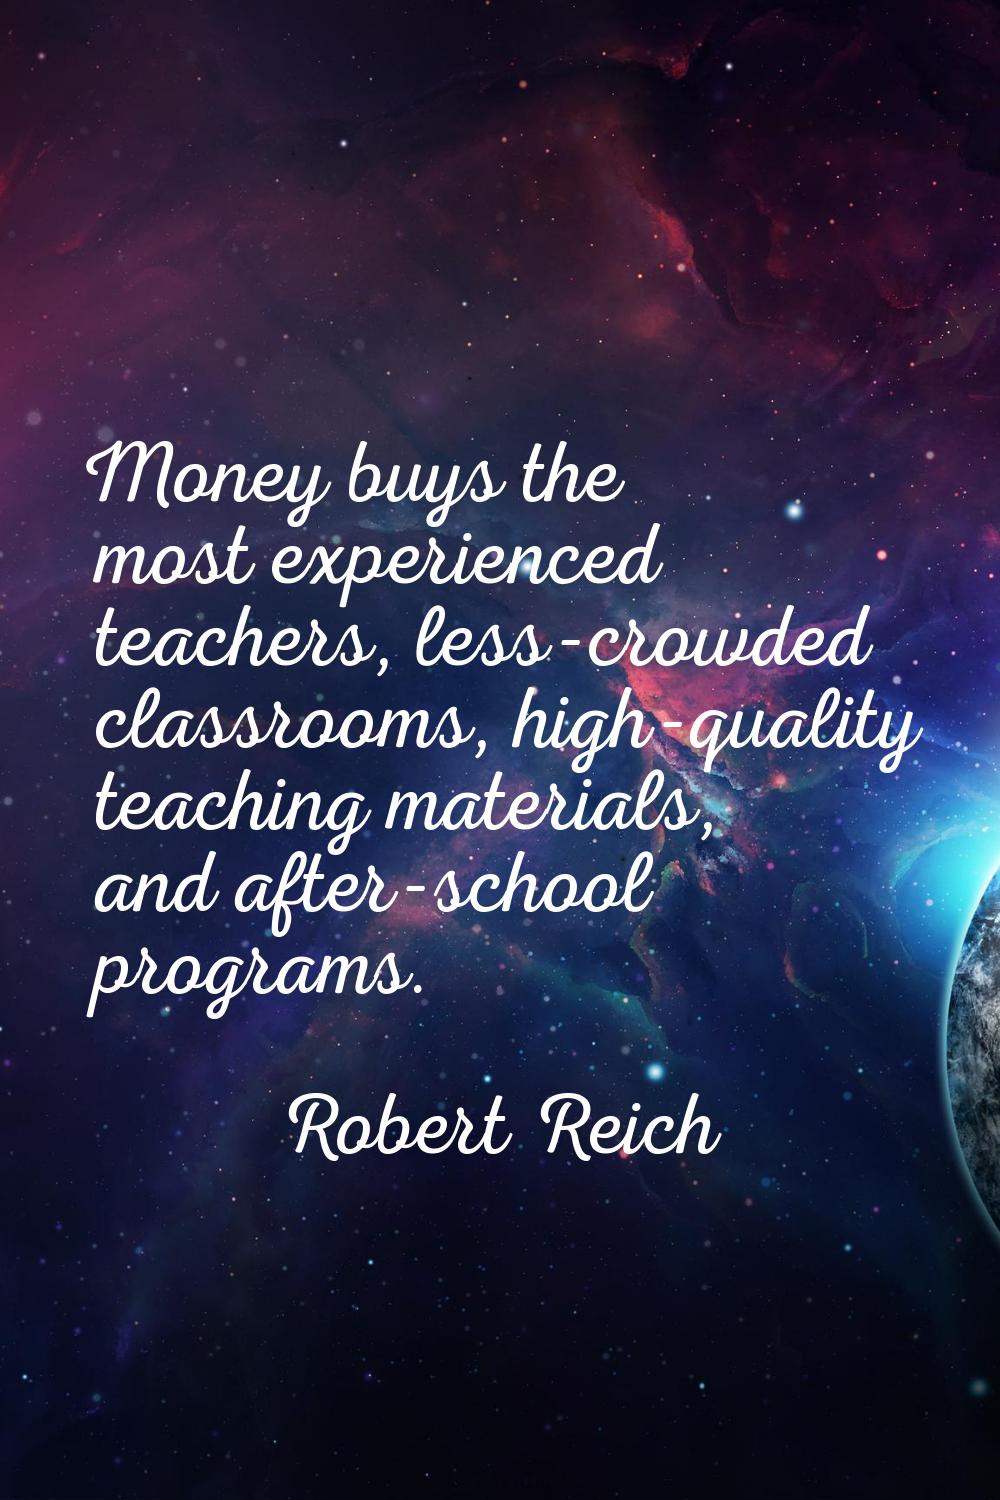 Money buys the most experienced teachers, less-crowded classrooms, high-quality teaching materials,